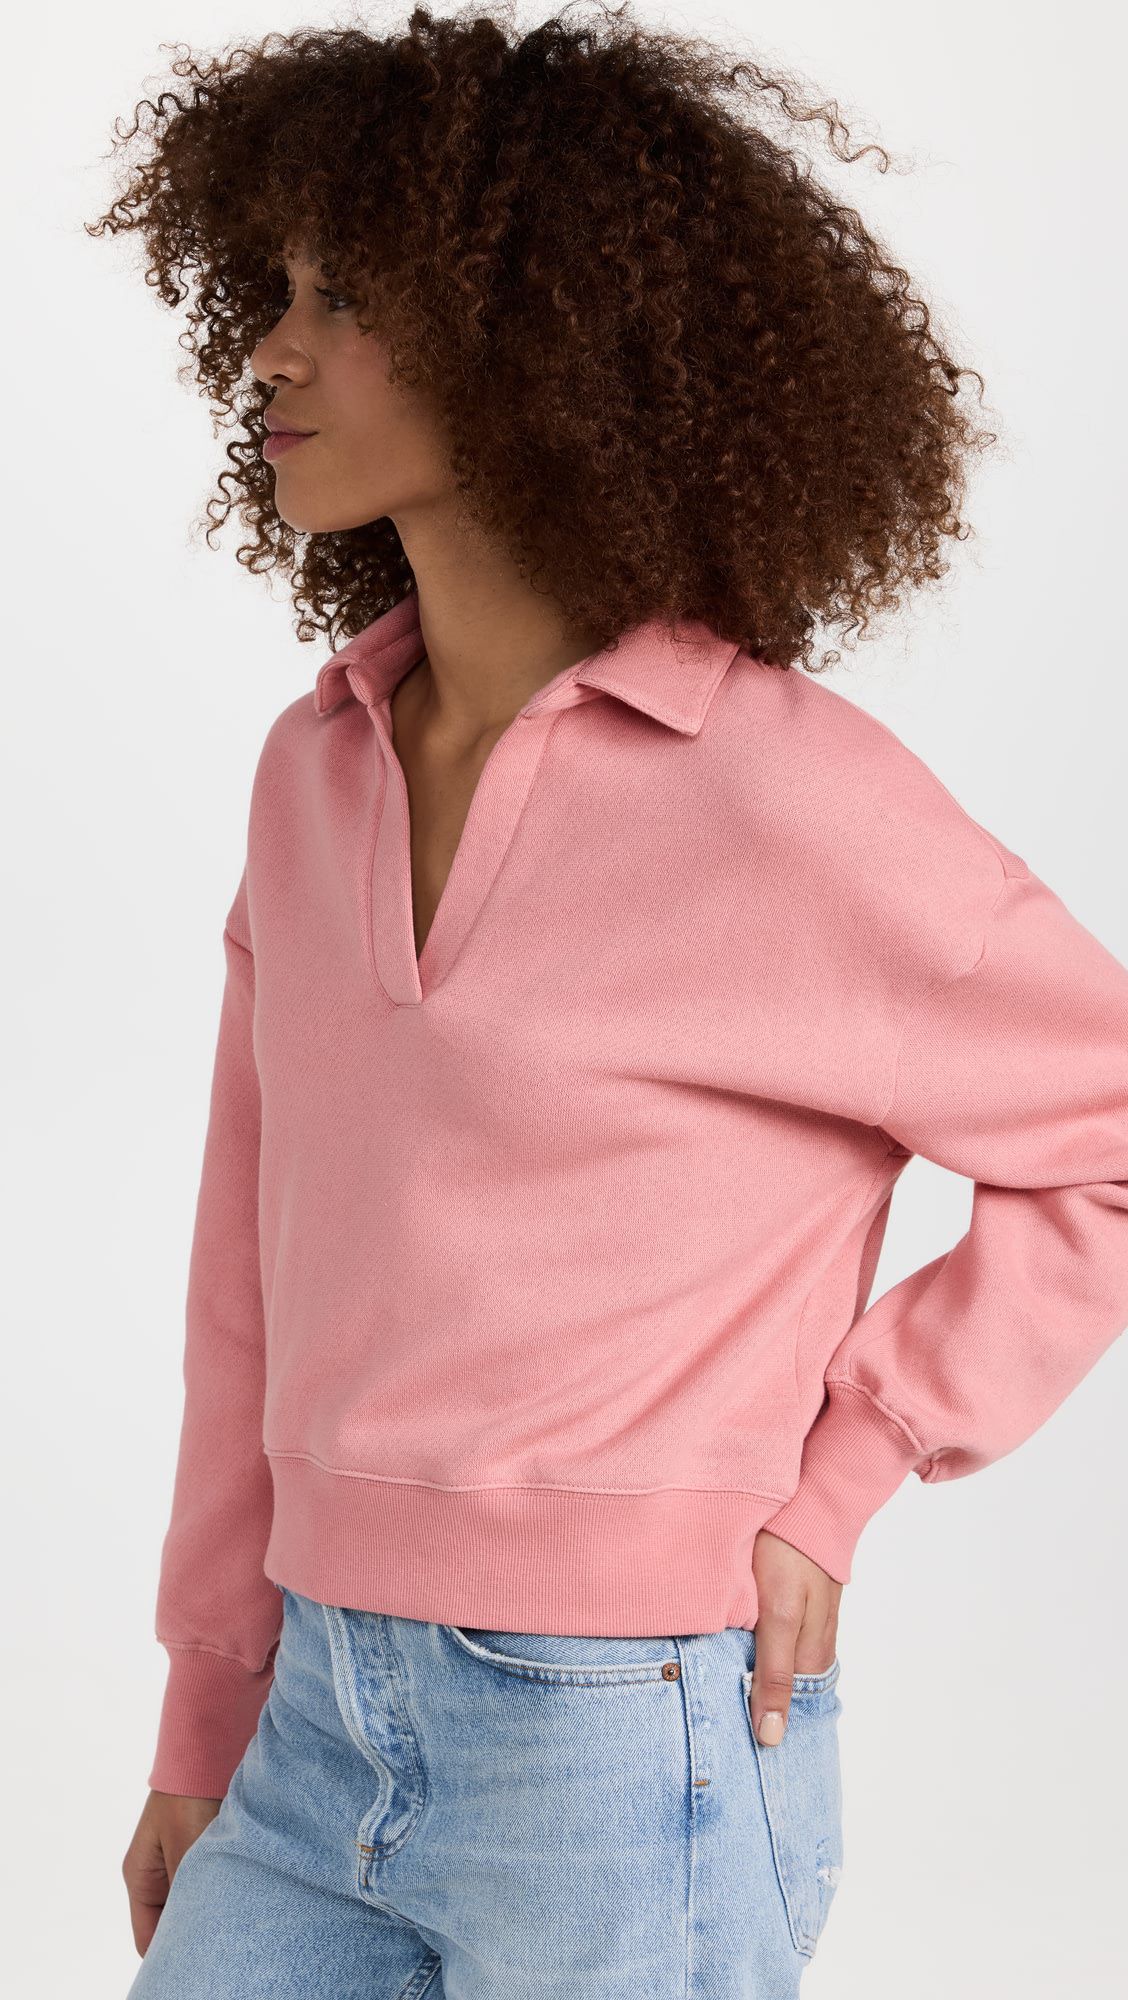 Made in china Pink V-neck loose casual polo neck top